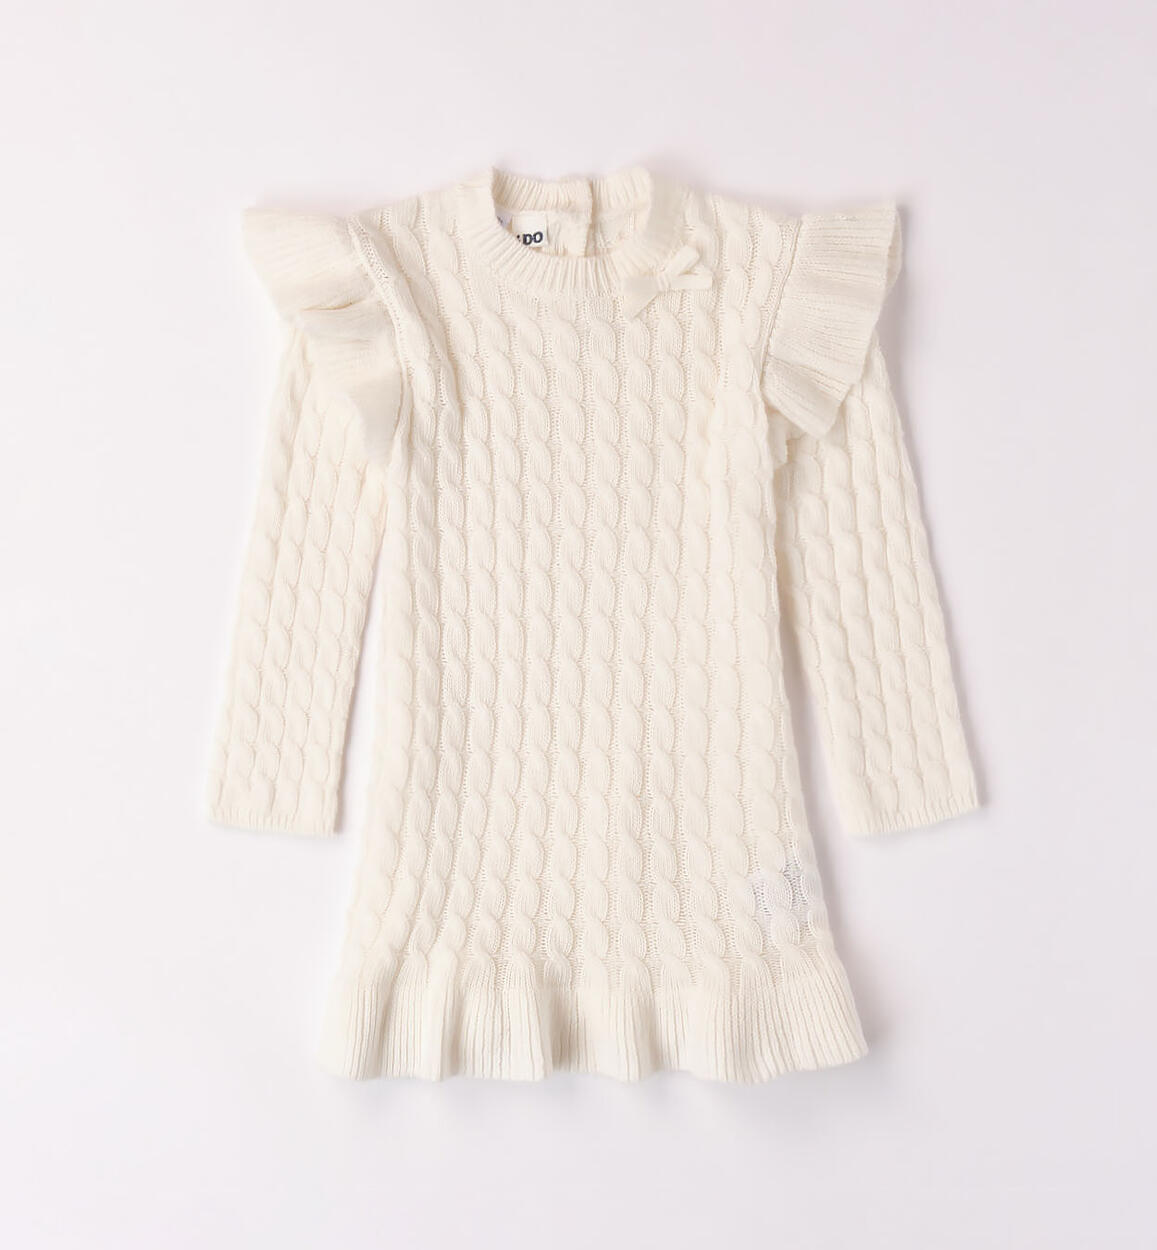 iDO knitted dress for girls from 9 months to 8 years | iDO